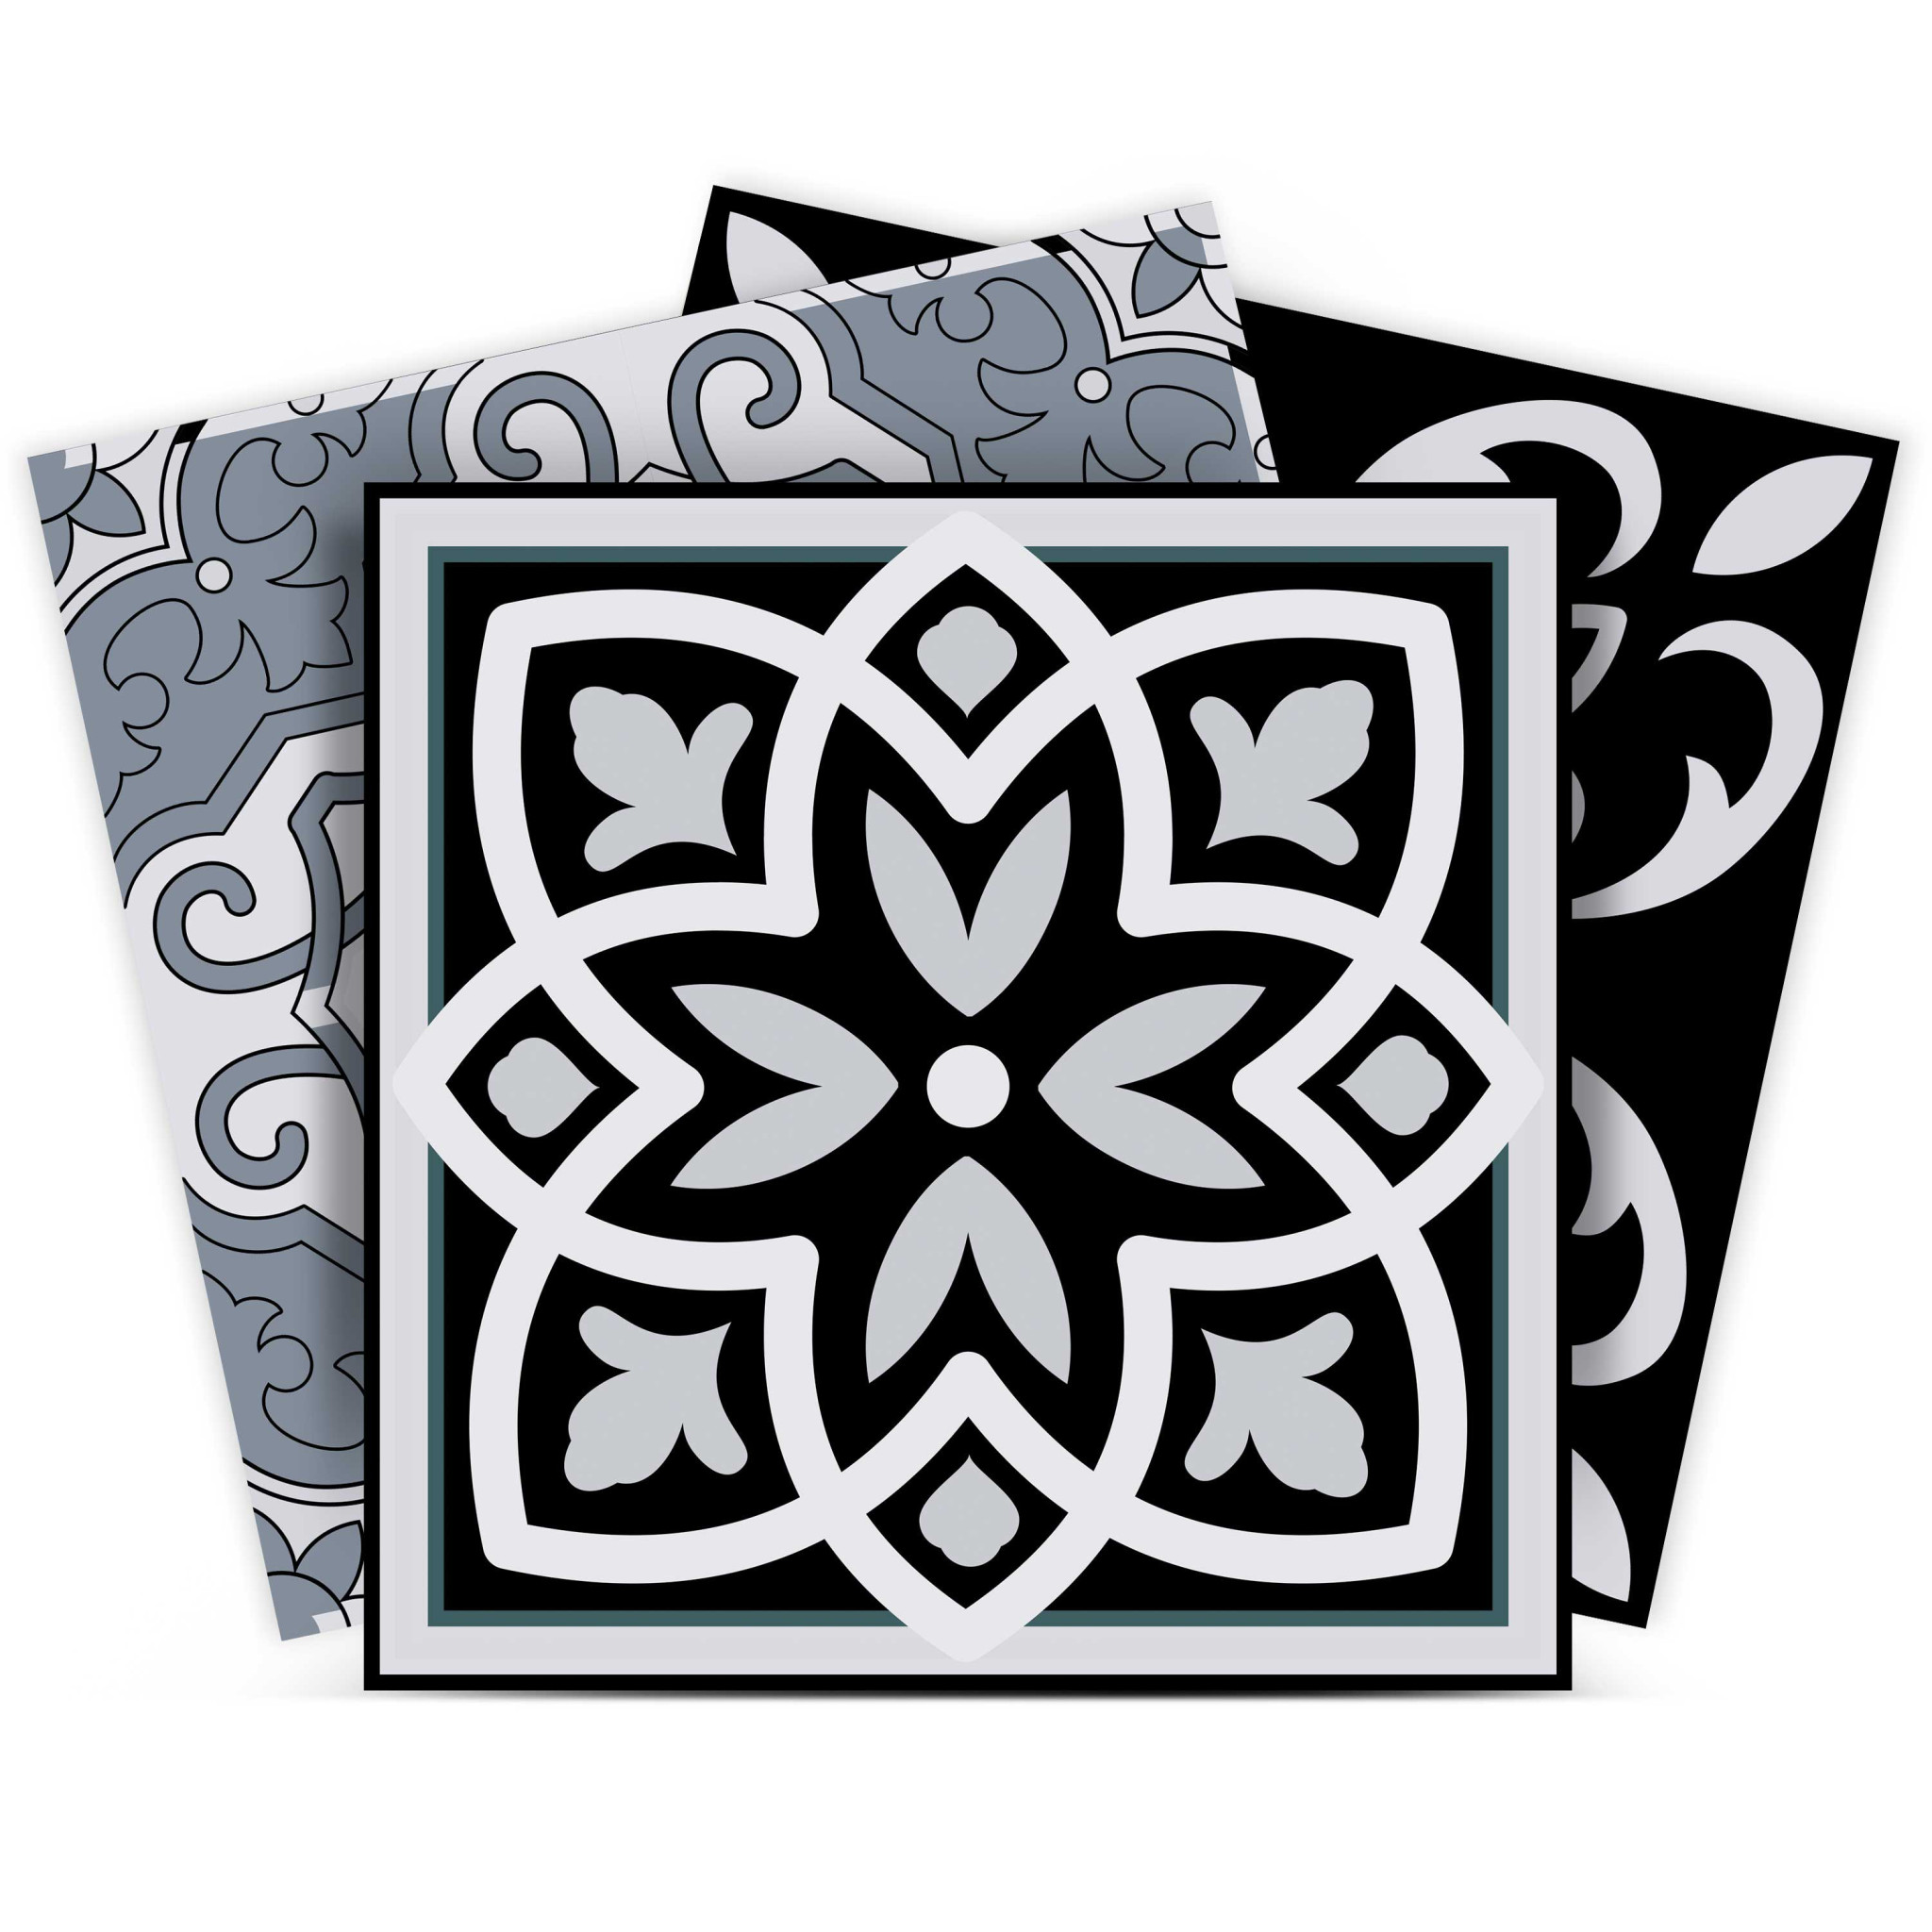 5" X 5" Black White and Gray Mosaic Peel and Stick Tiles-399871-1